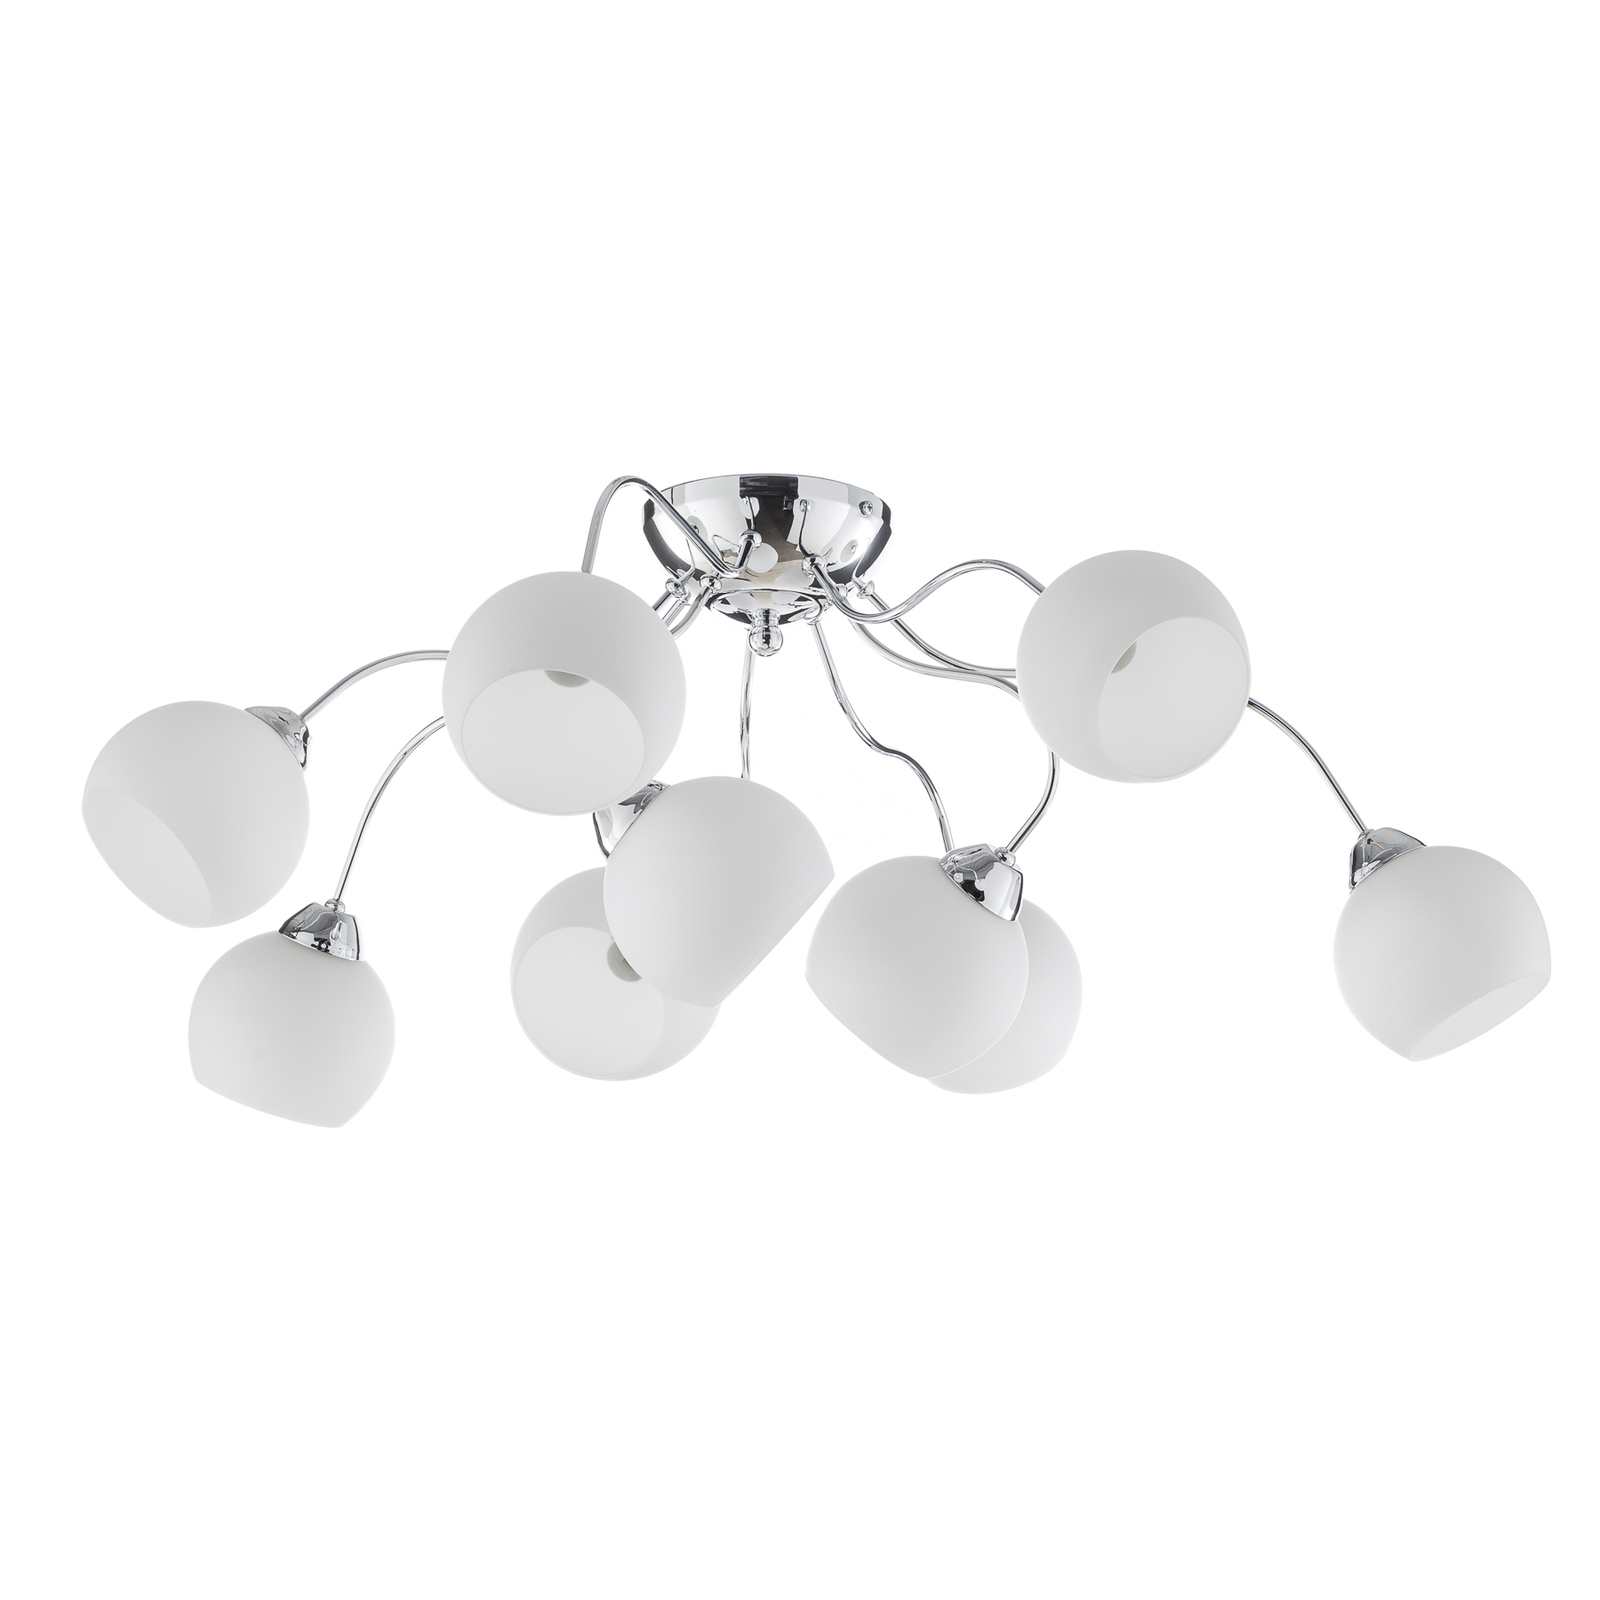 Spider timeless ceiling light, glass lampshades